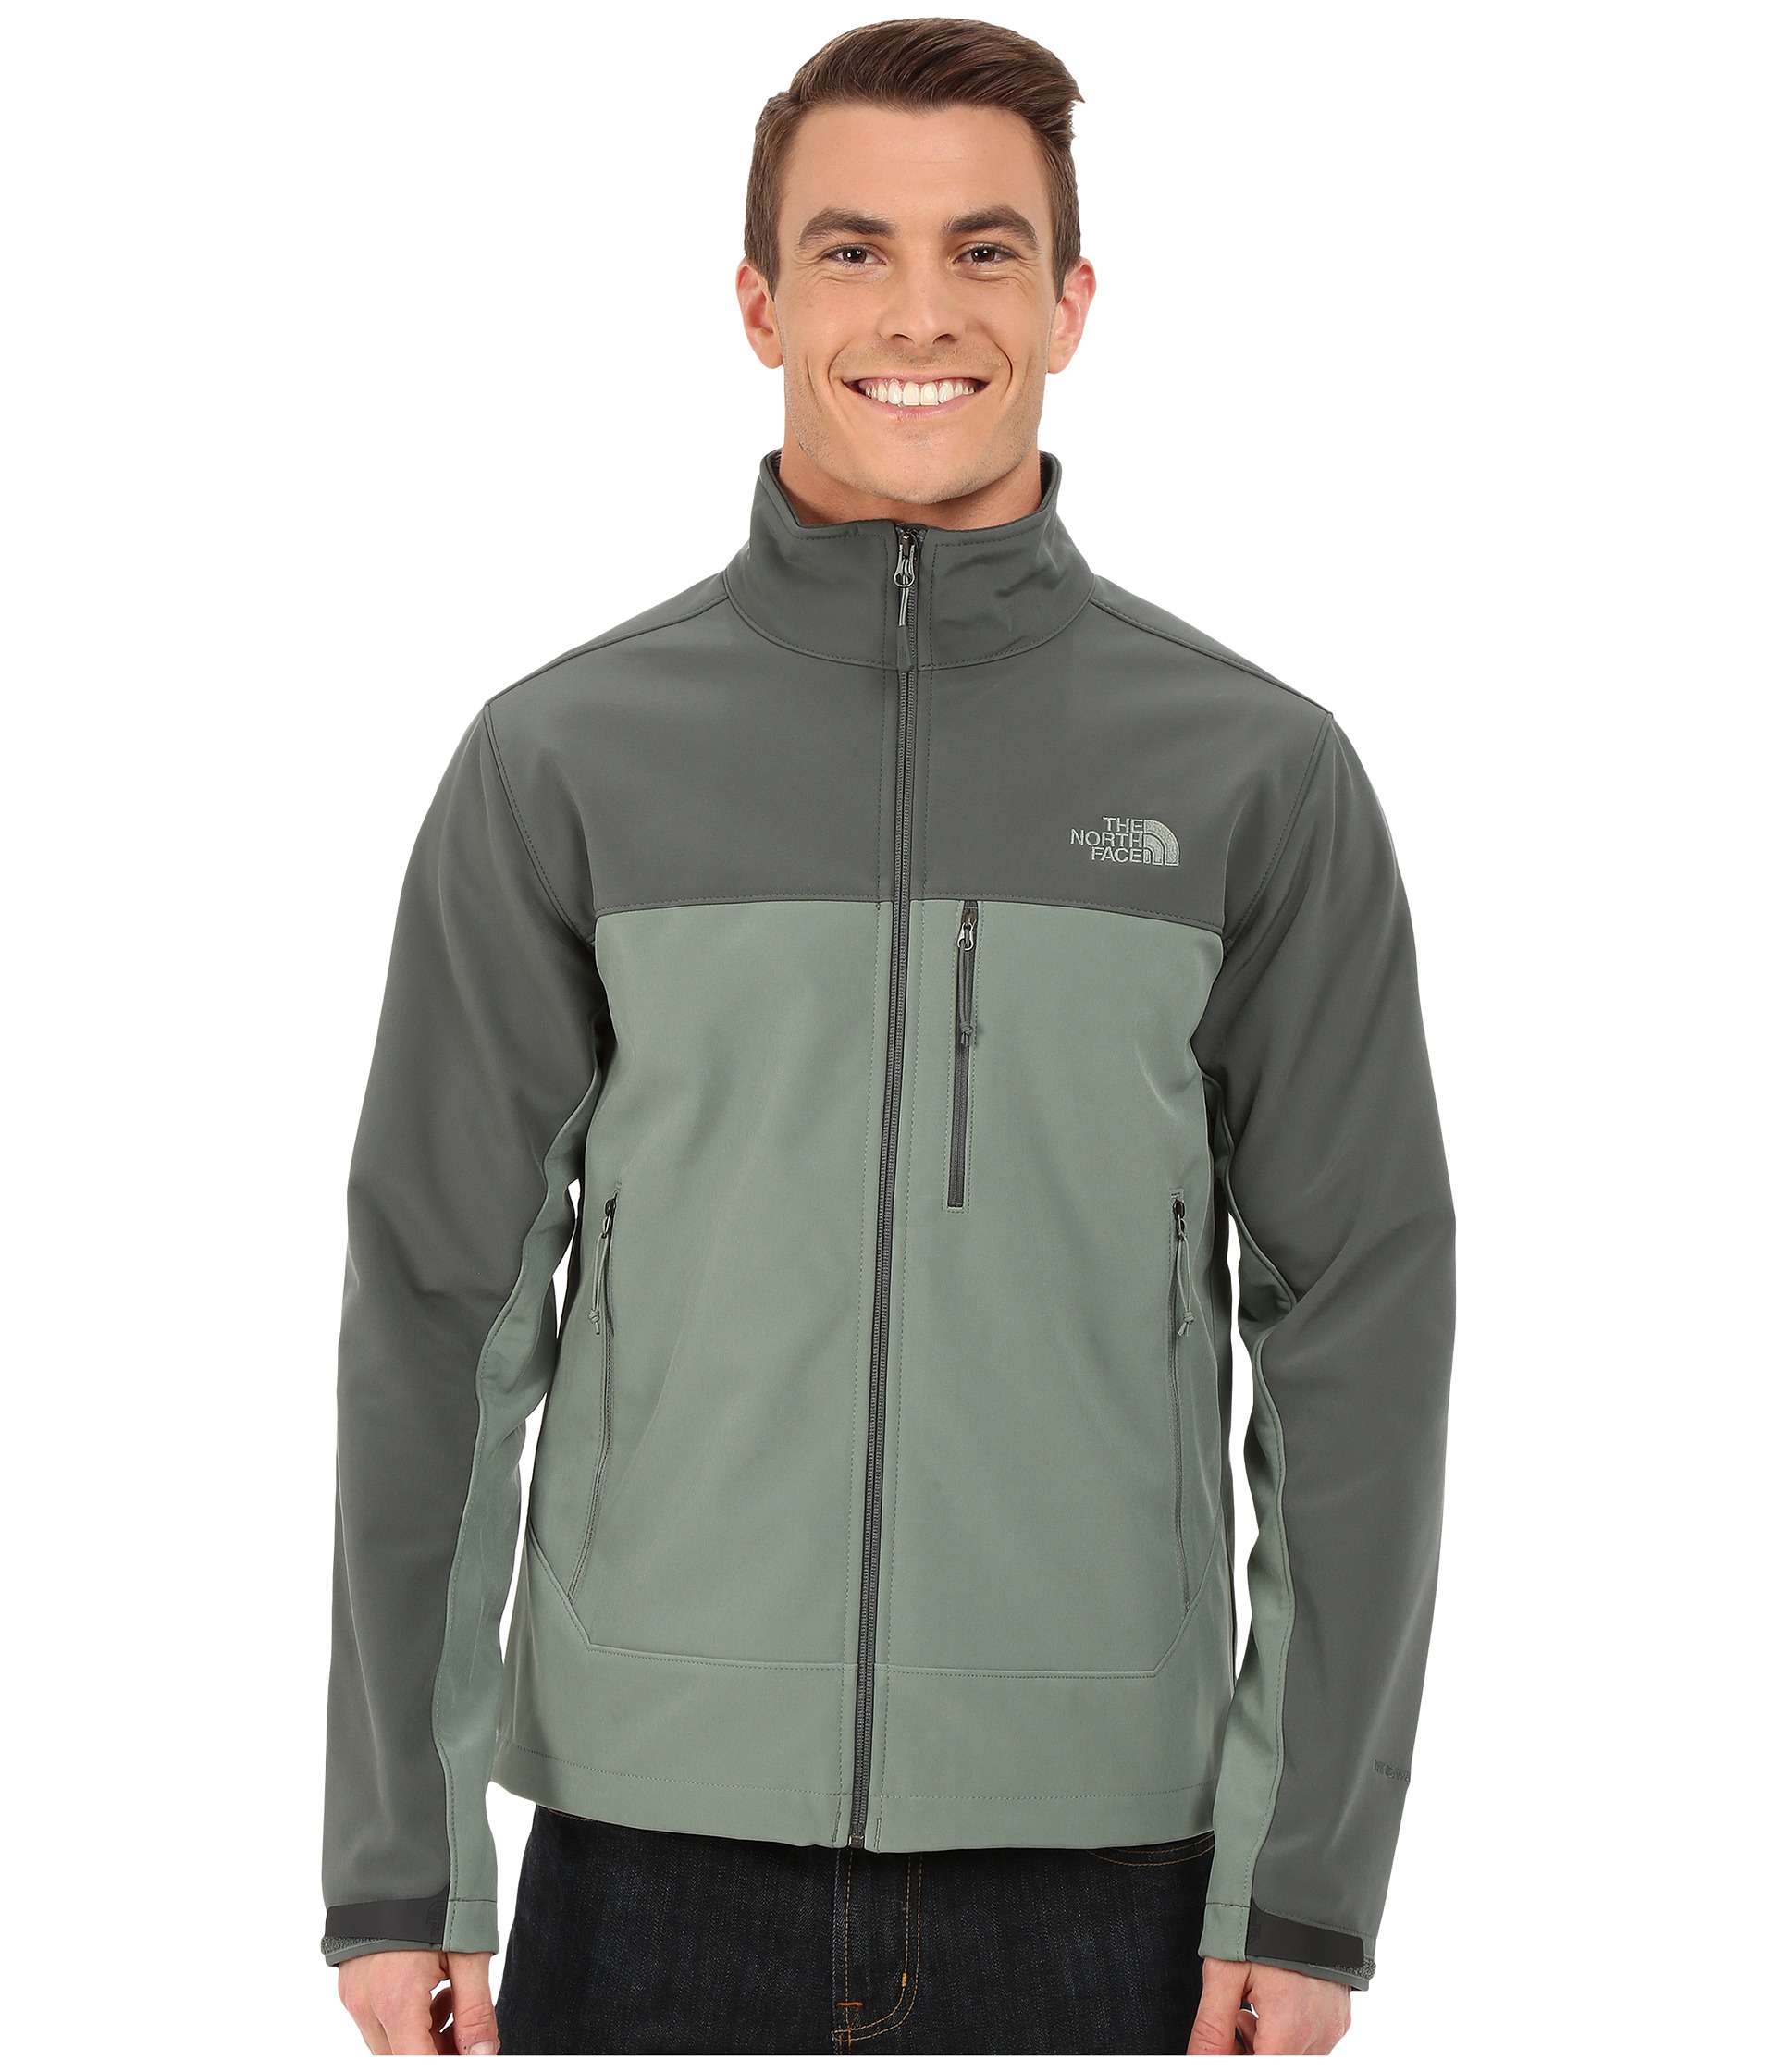 the north face apex bionic jacket boys'